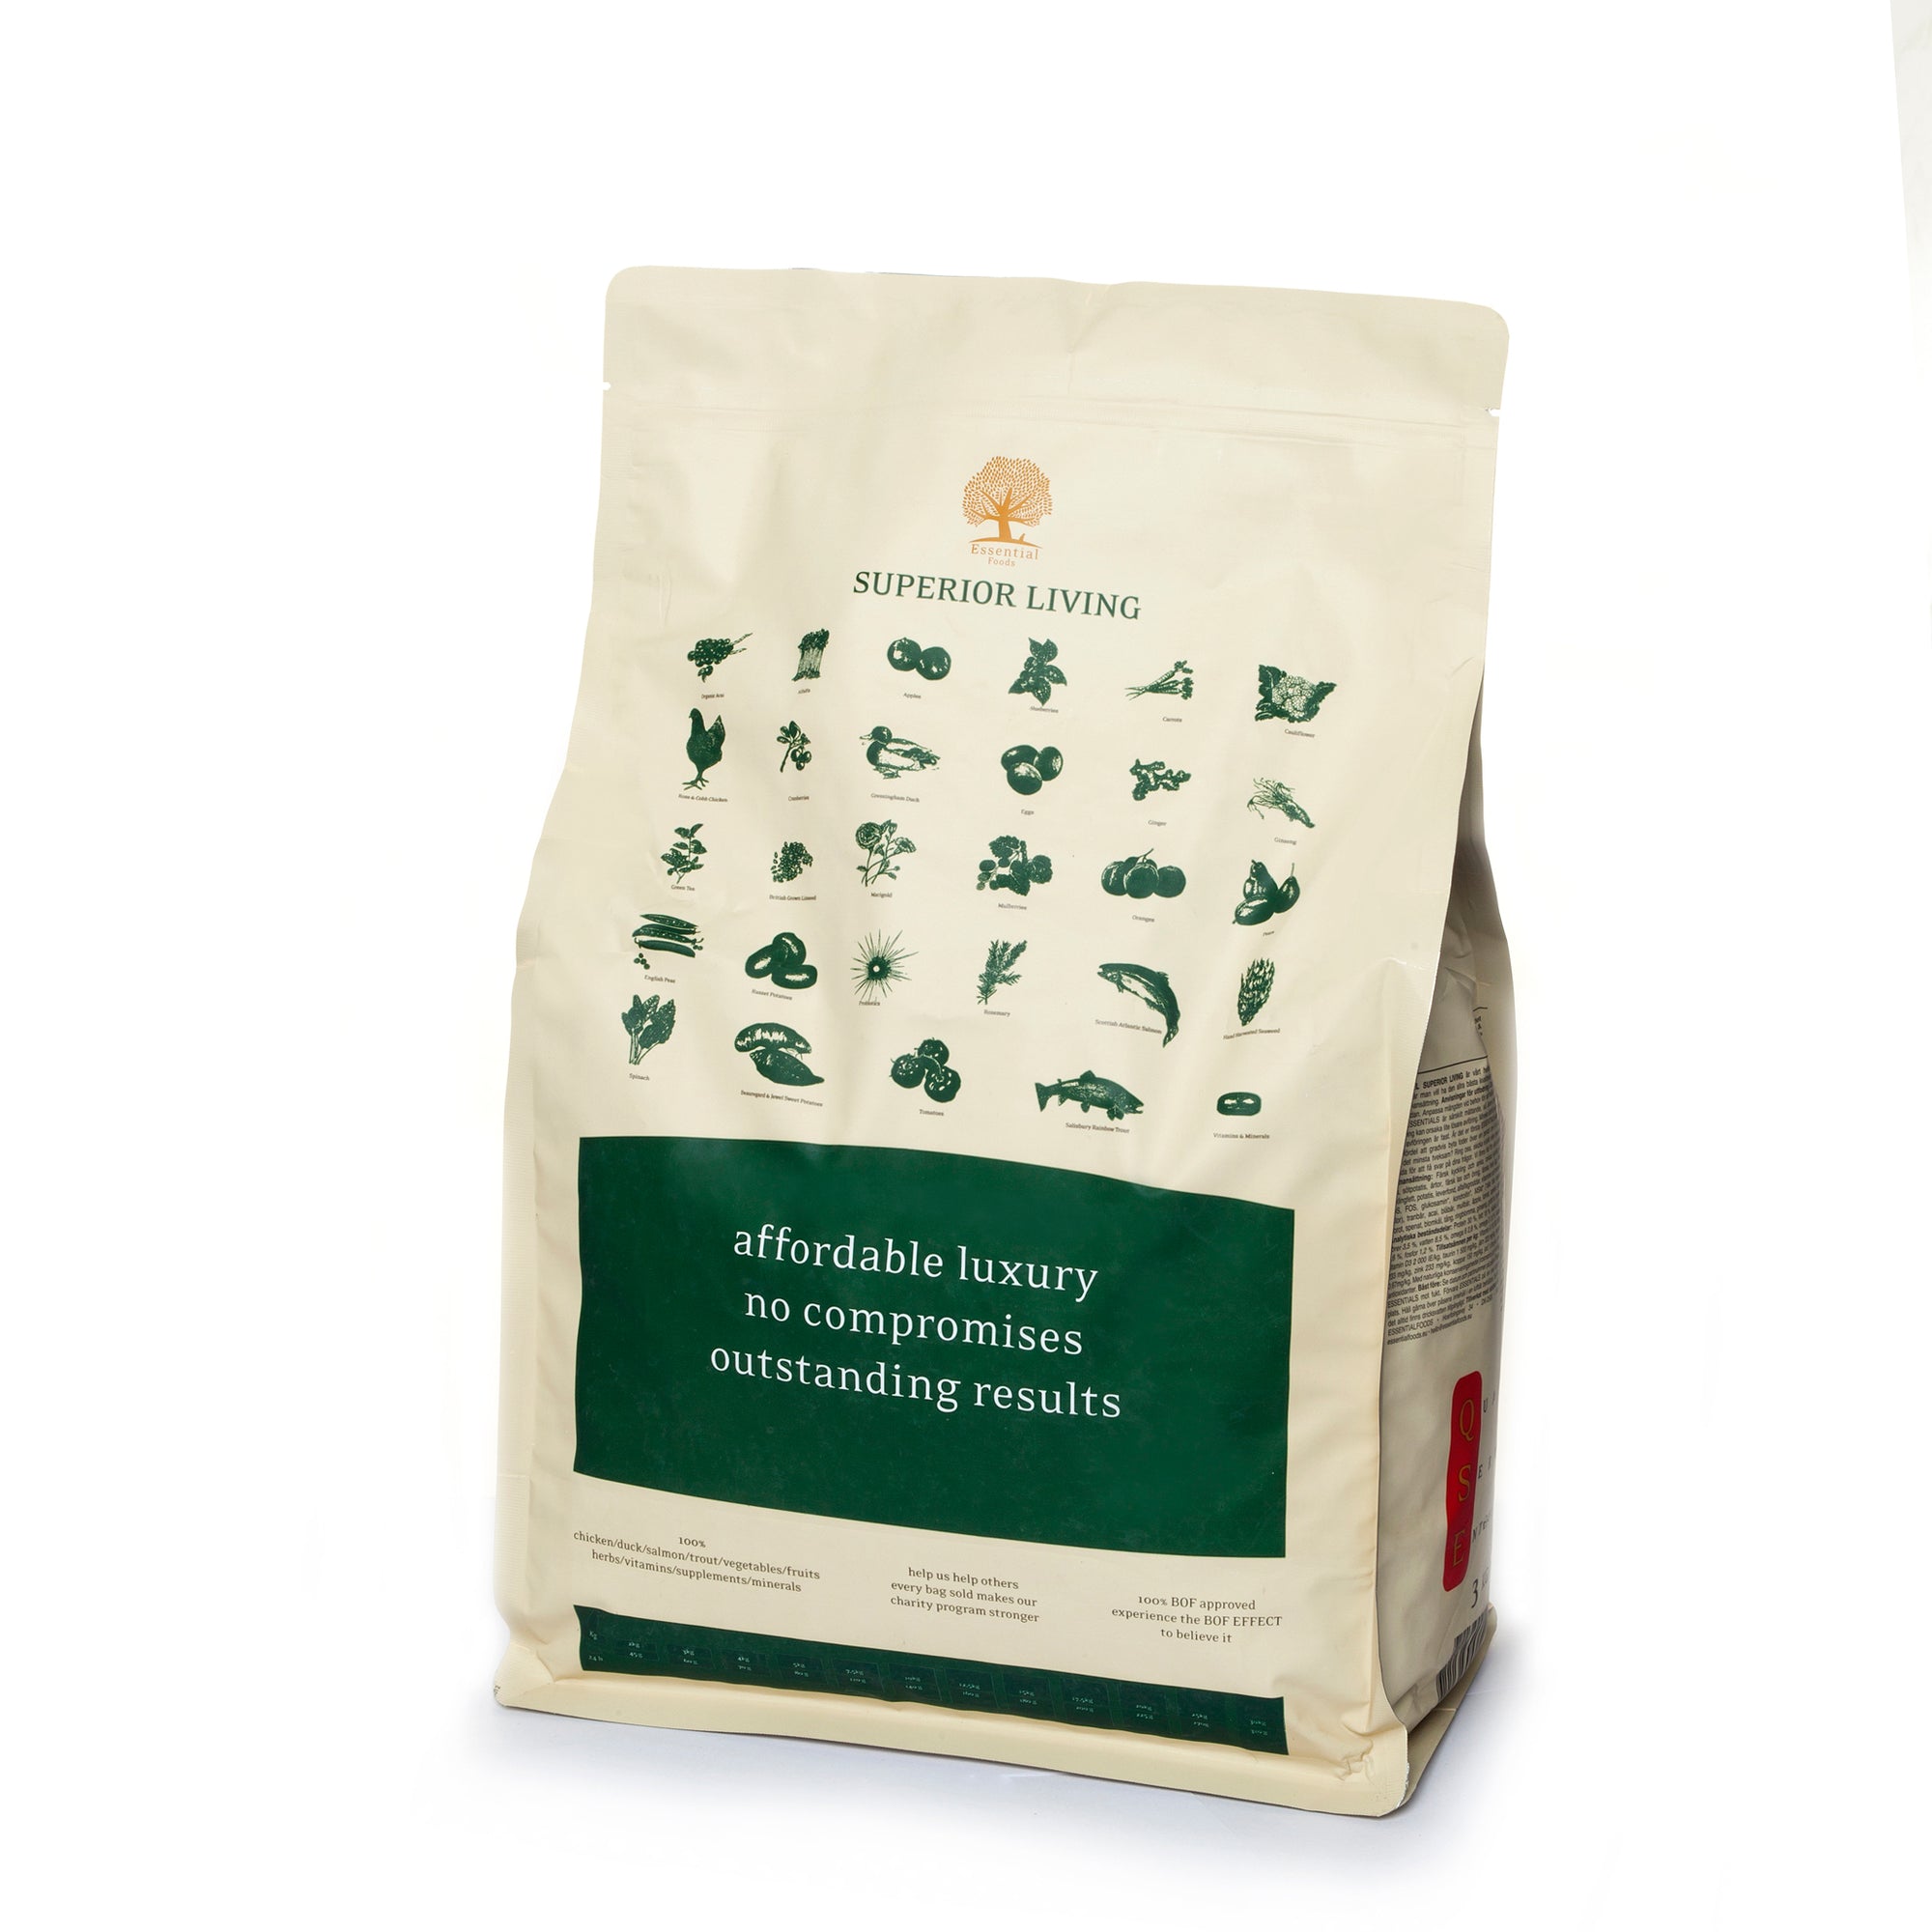 80% meat duck, chicken, salmon, trout, eggs Super premium grainless feed for adult dogs of small breeds weighing up to 15kg SUPERIOR LIVING